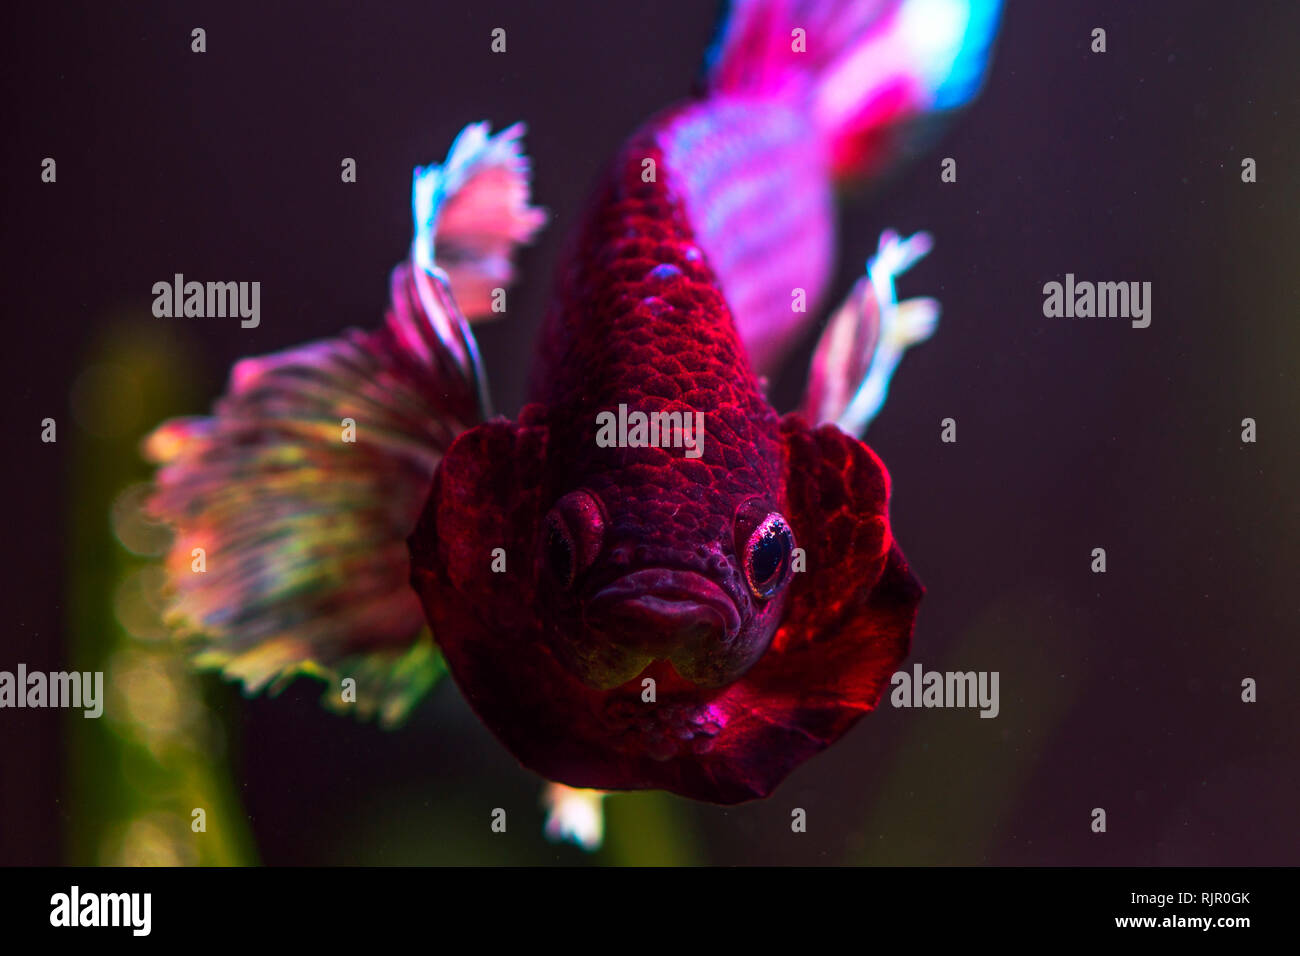 Close-up and details of a Dumbo Ear Betta Fish Stock Photo